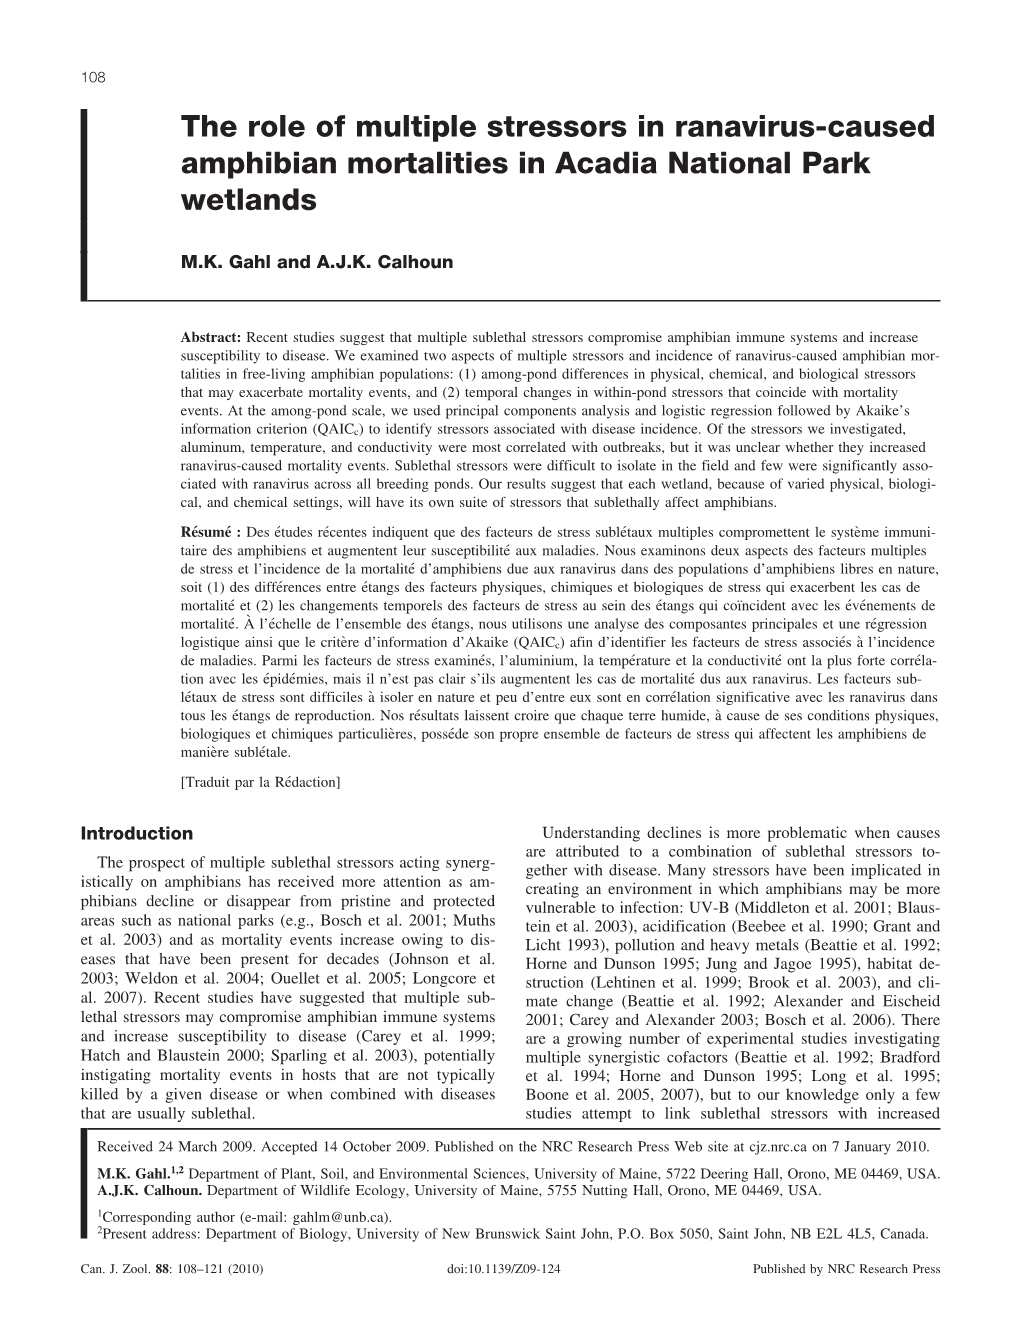 The Role of Multiple Stressors in Ranavirus-Caused Amphibian Mortalities in Acadia National Park Wetlands